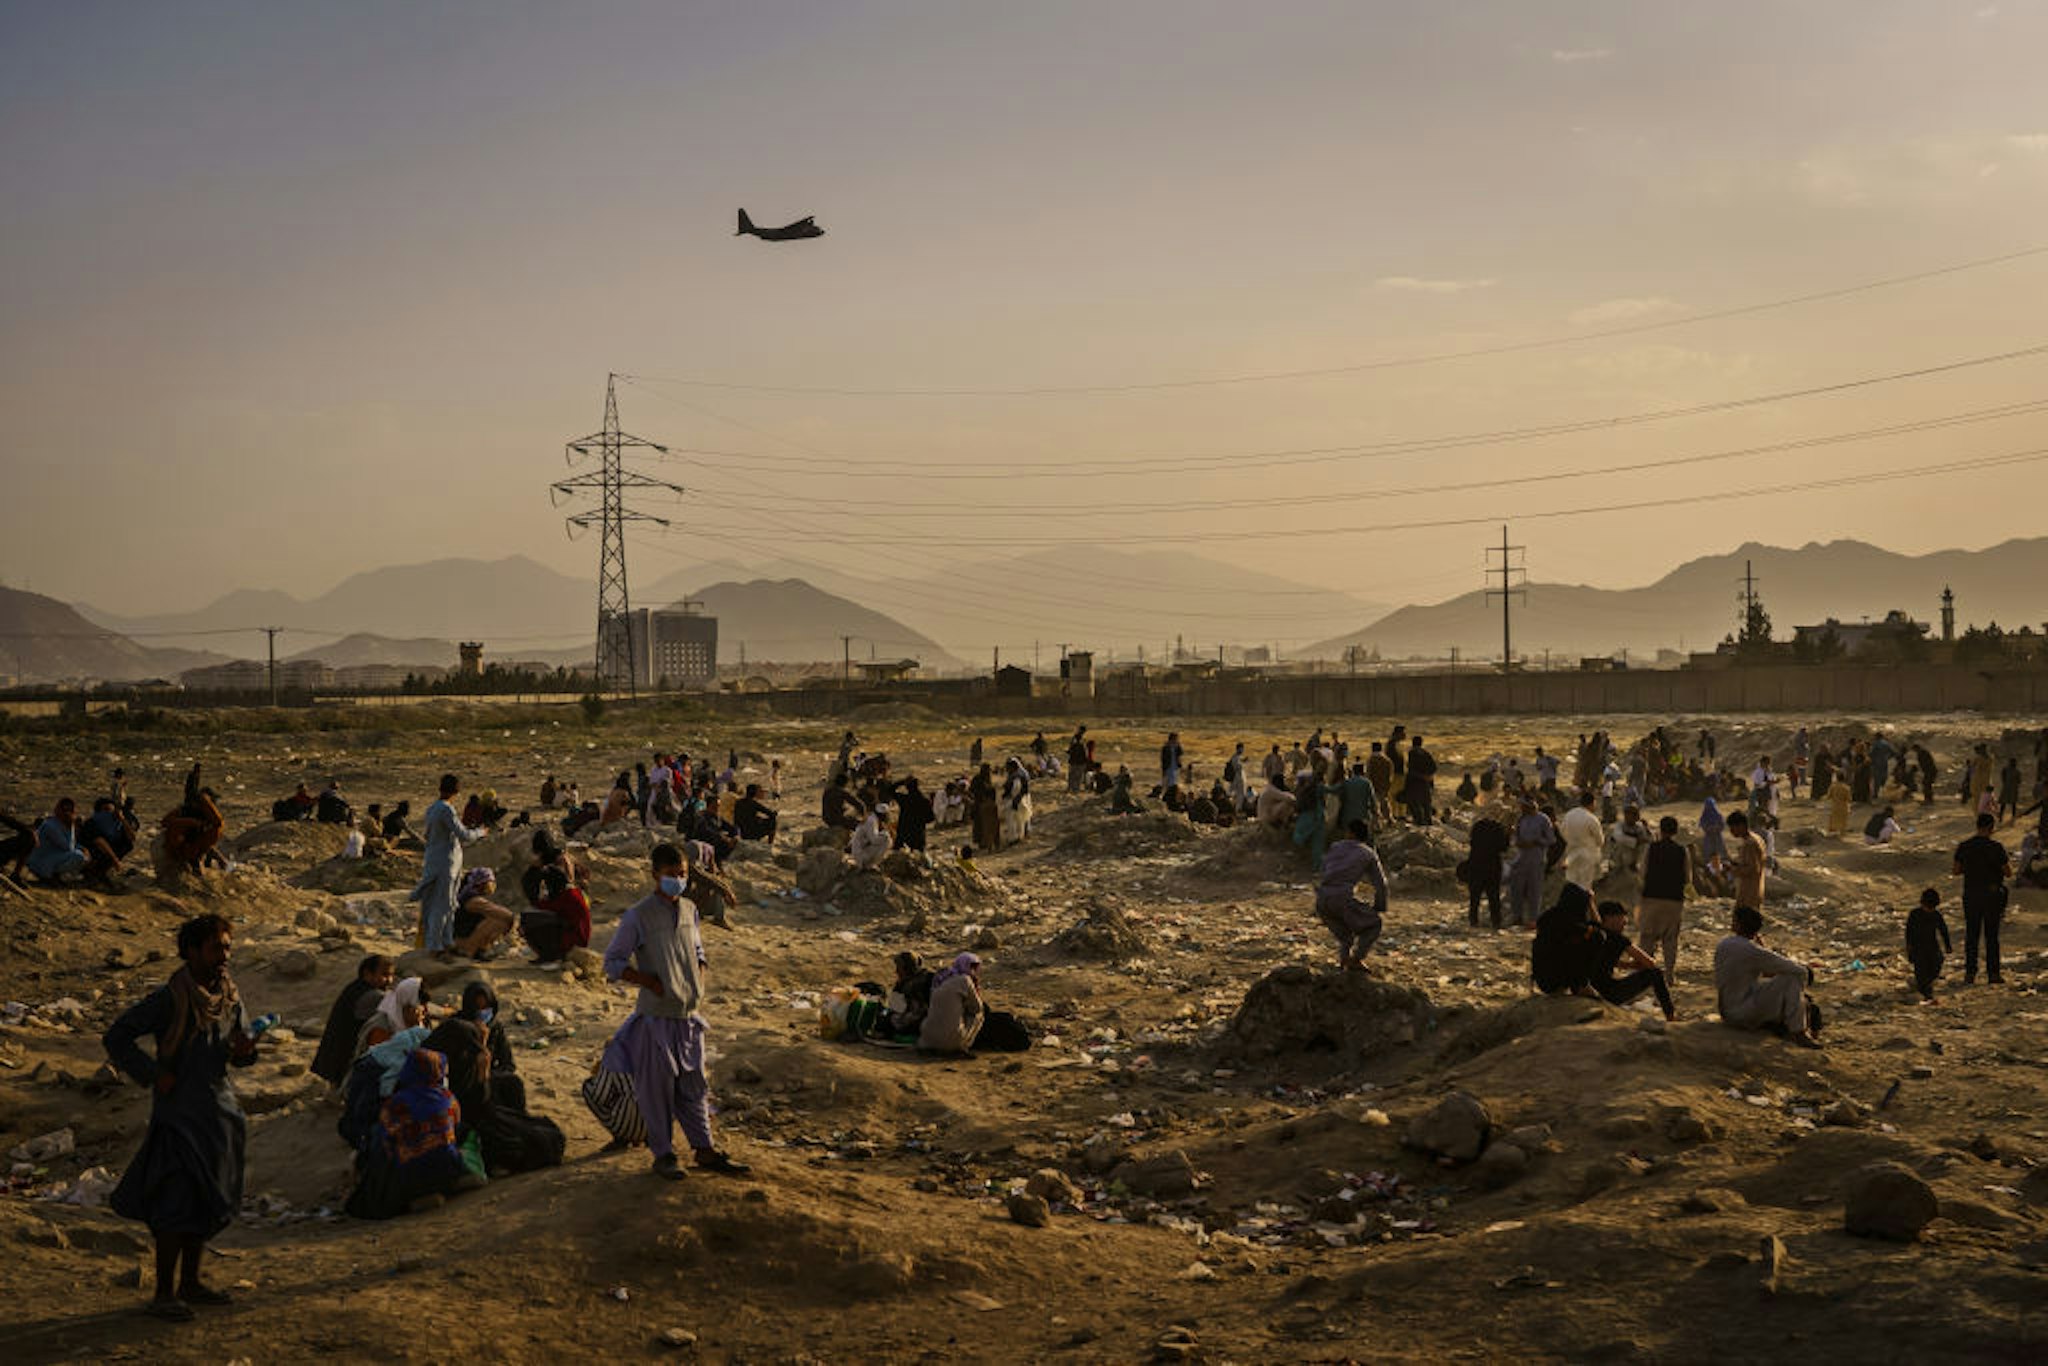 KABUL, AFGHANISTAN -- AUGUST 23, 2021: A military transport plane launches off while Afghans who cannot get into the airport to evacuate, watch and wonder while stranded outside, in Kabul, Afghanistan, Monday, Aug. 23, 2021.